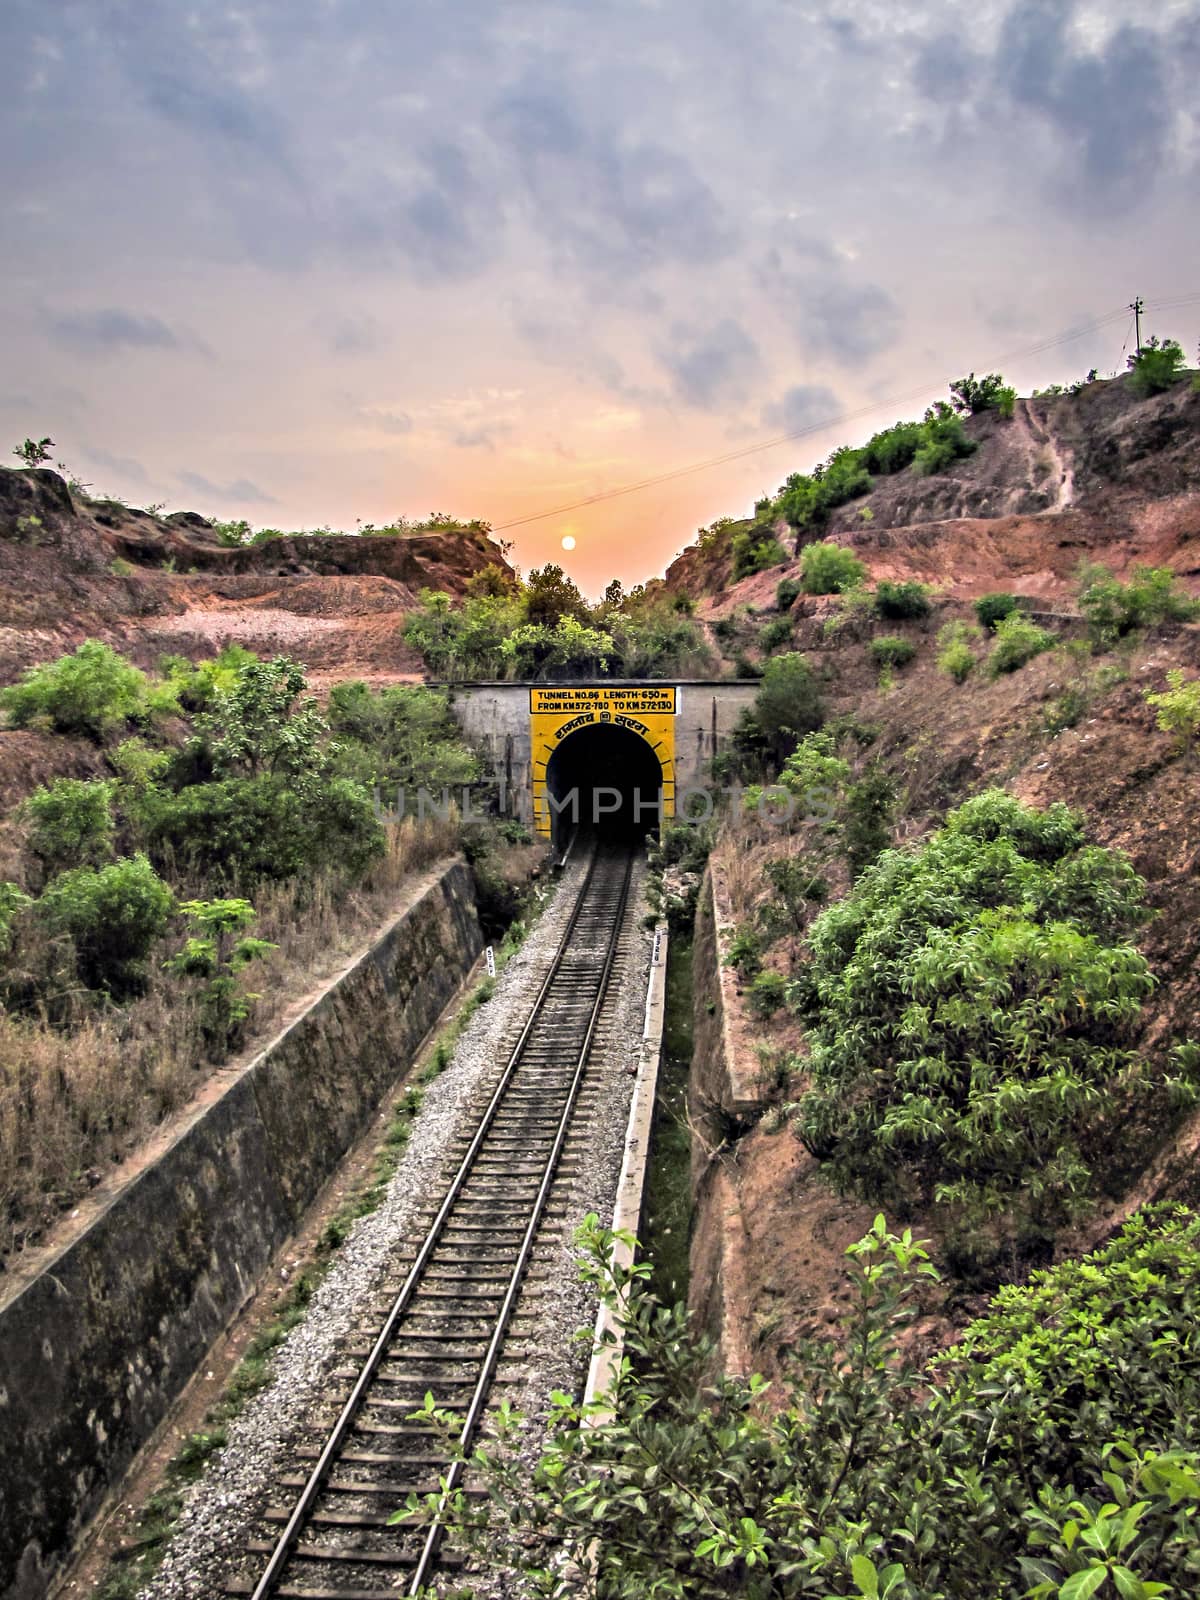 Sunset over the railway line going into tunnel at Honavar, Karnataka. by lalam